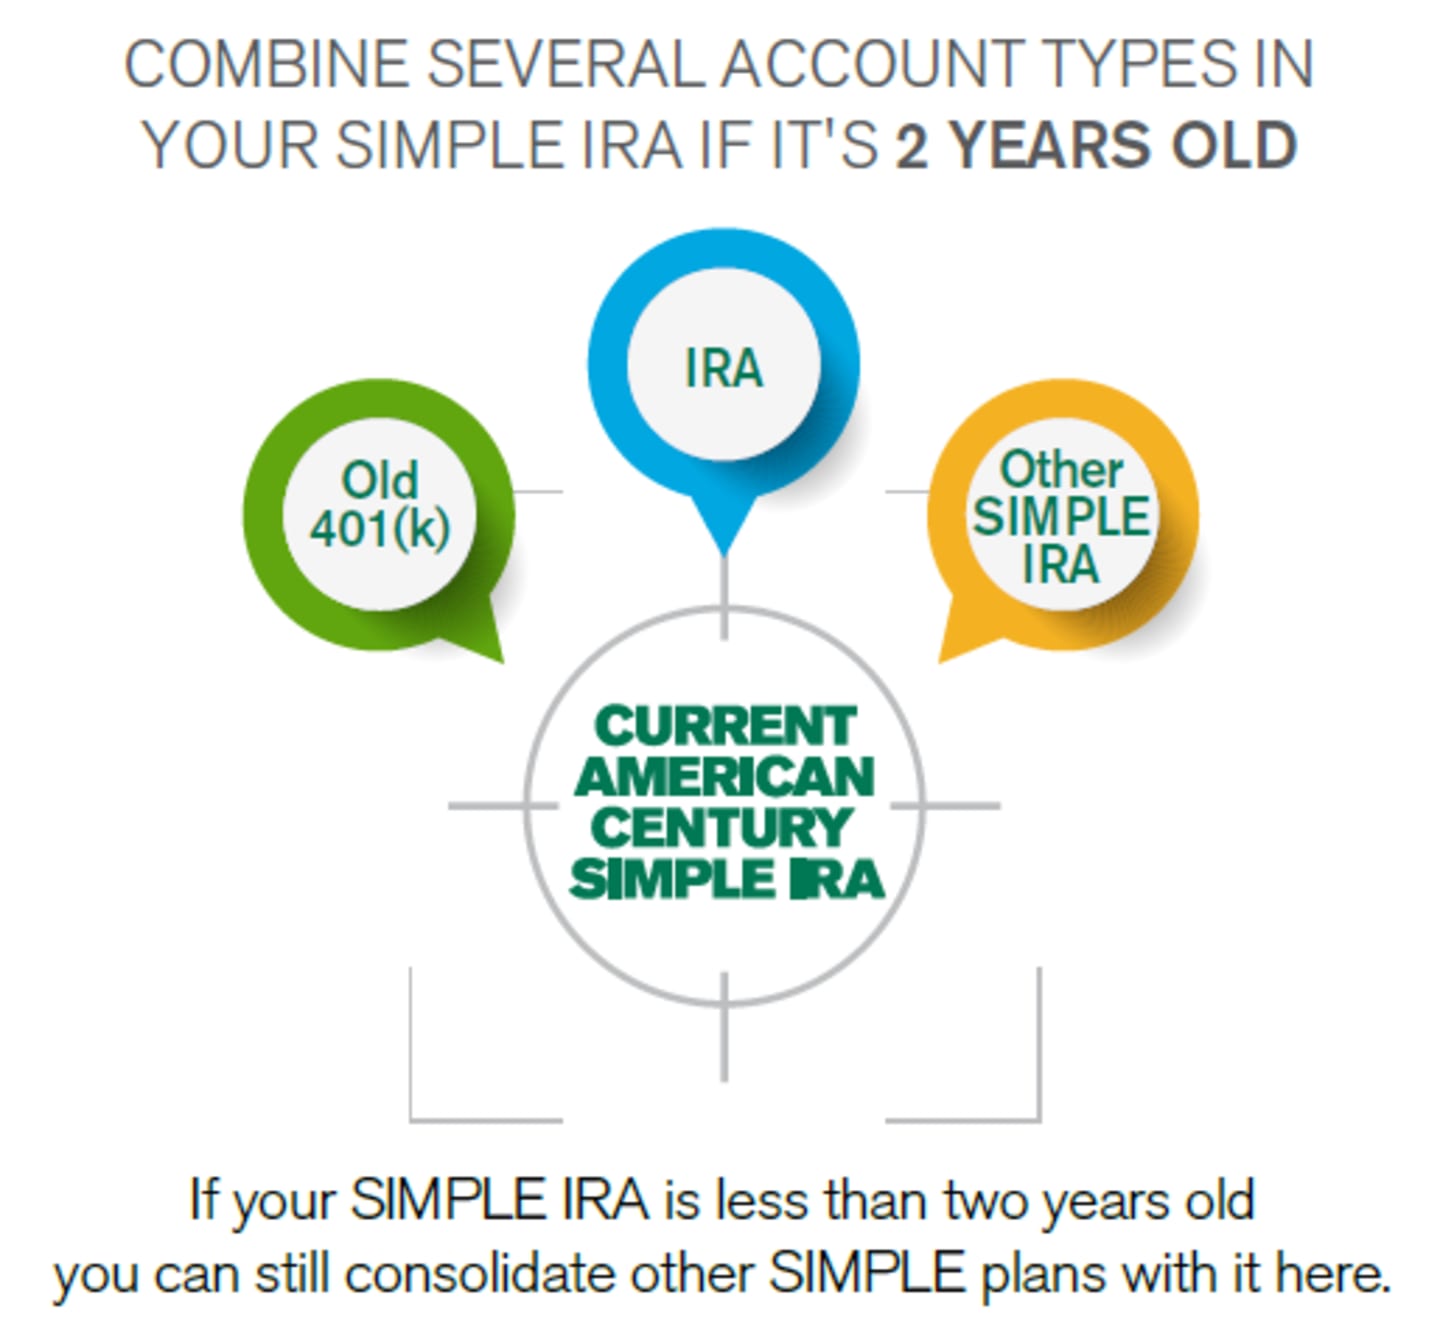 Graphic showing old 401(k), IRA and Other SIMPLE IRA as options to rollover into an American Century SIMPLE IRA.